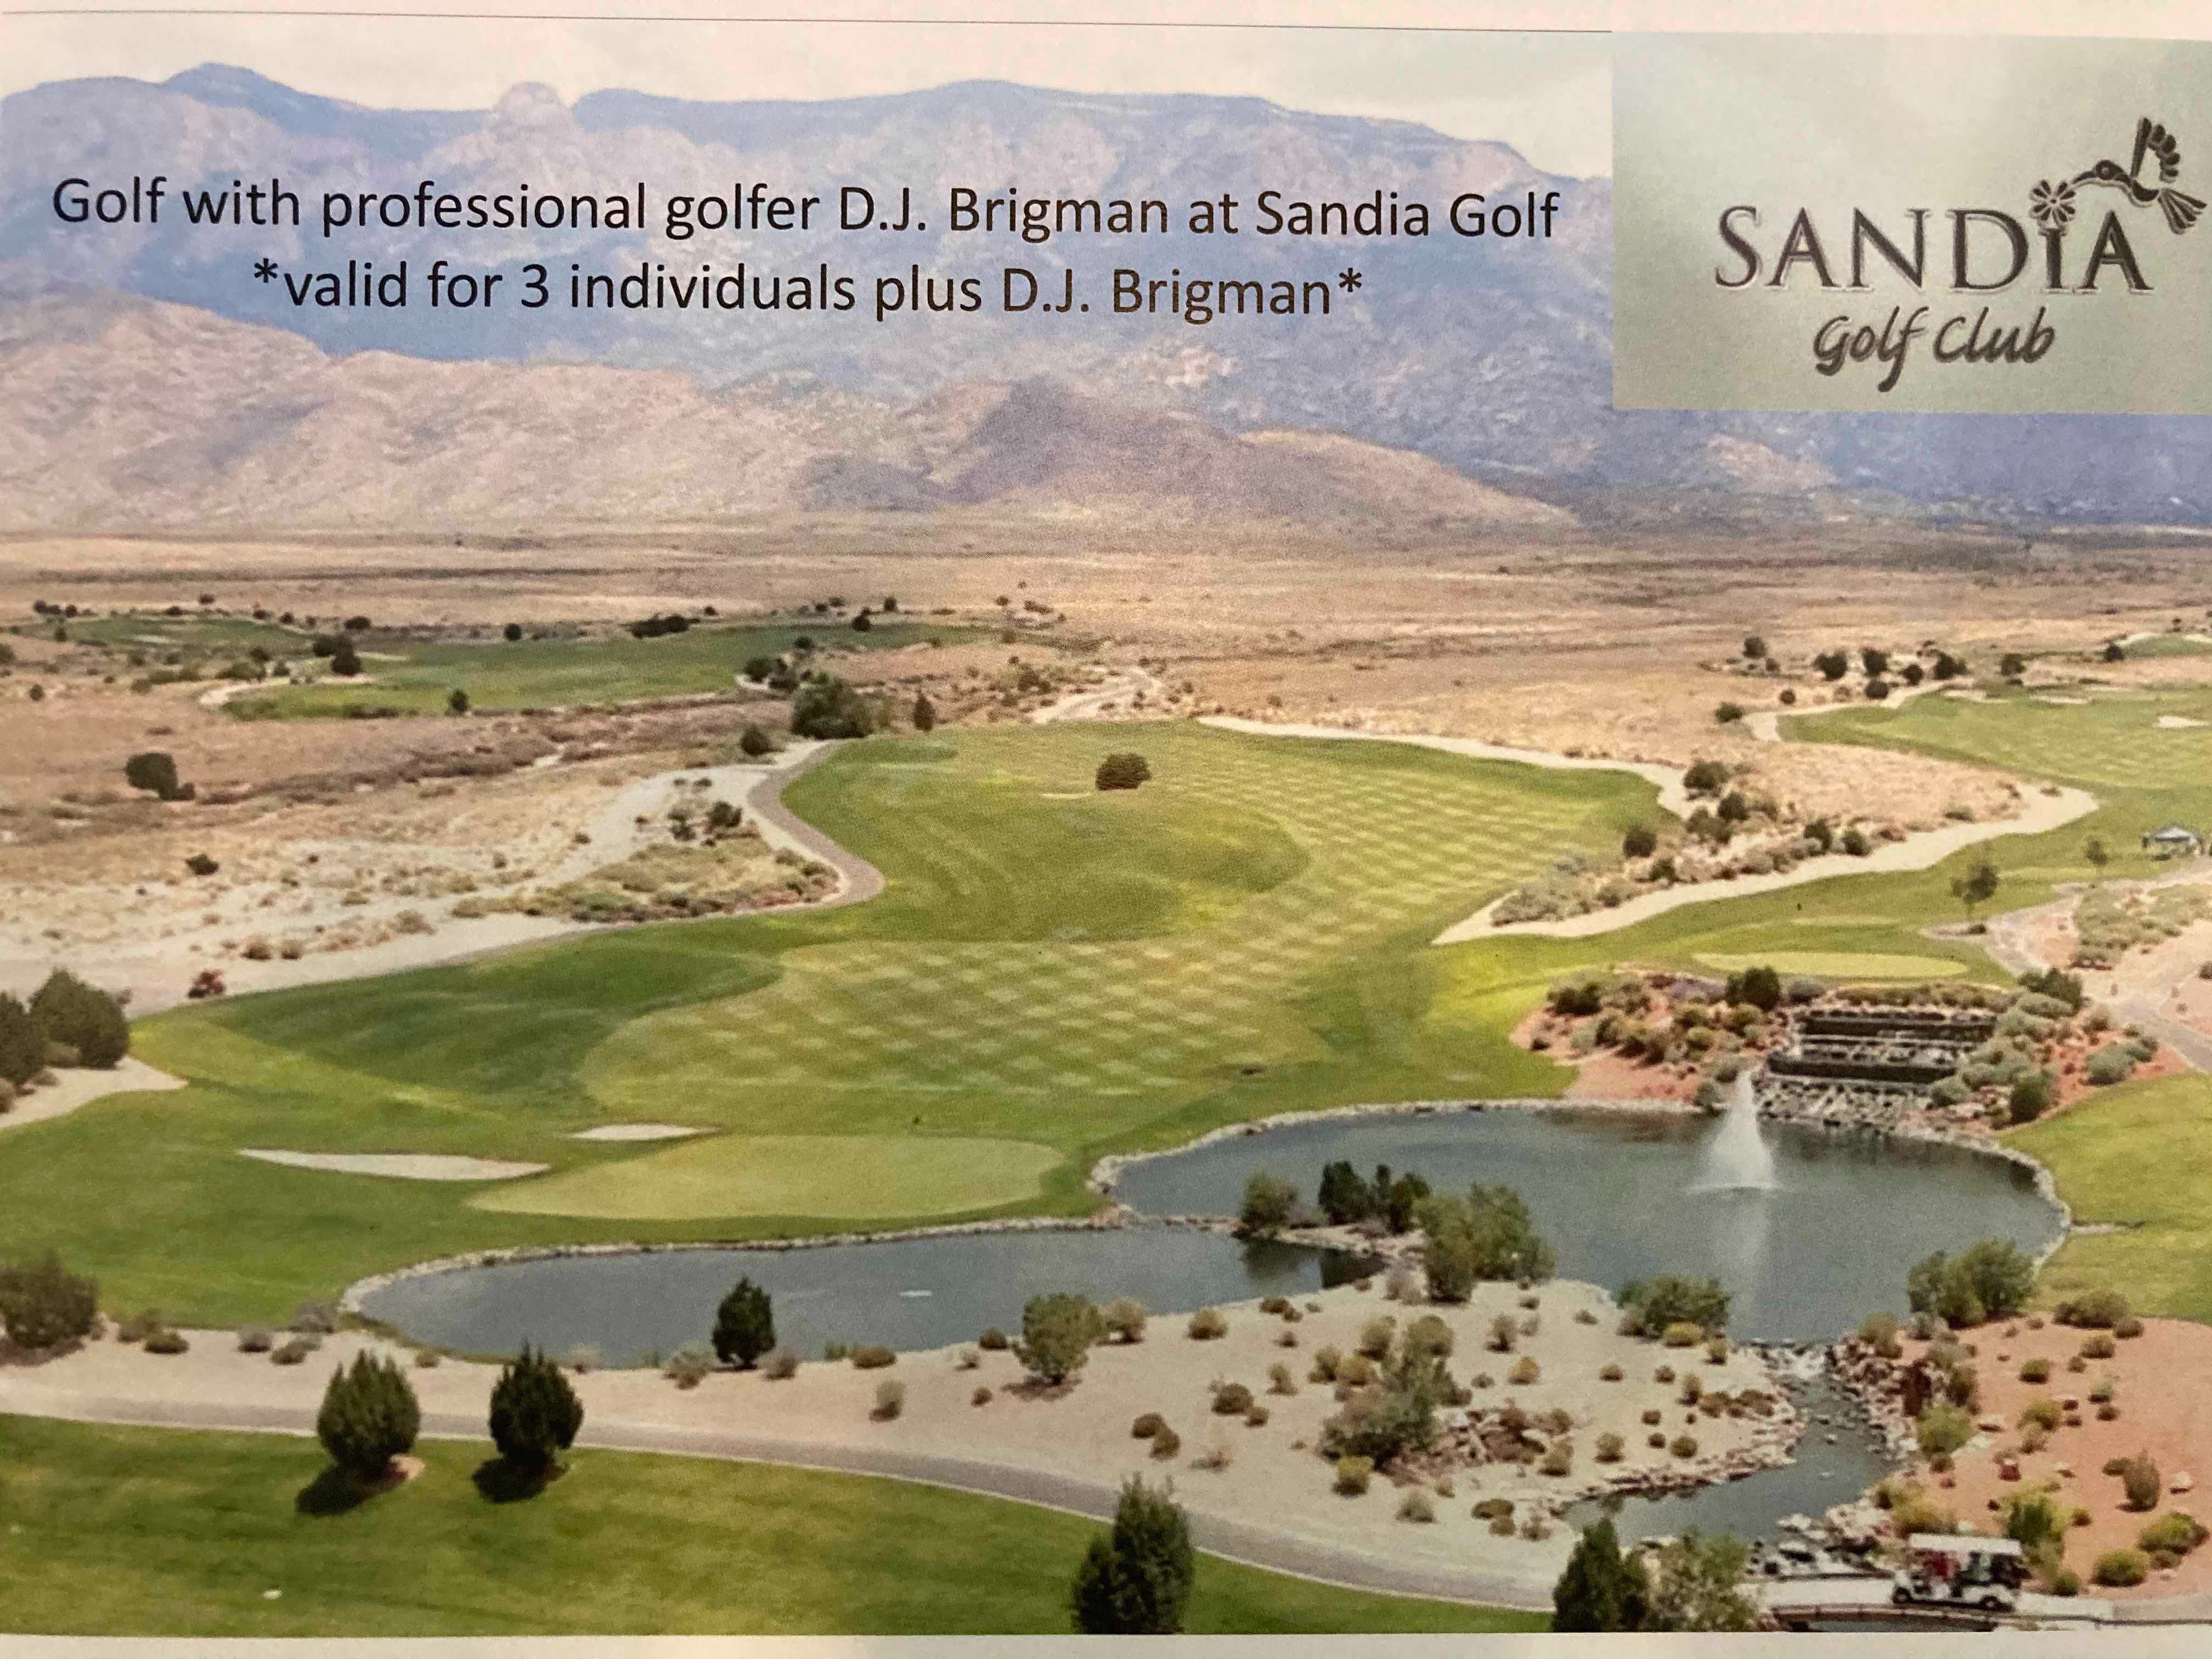 Golf for 3 individuals at SANDIA Golf with Professional Golf D.J. Brigman